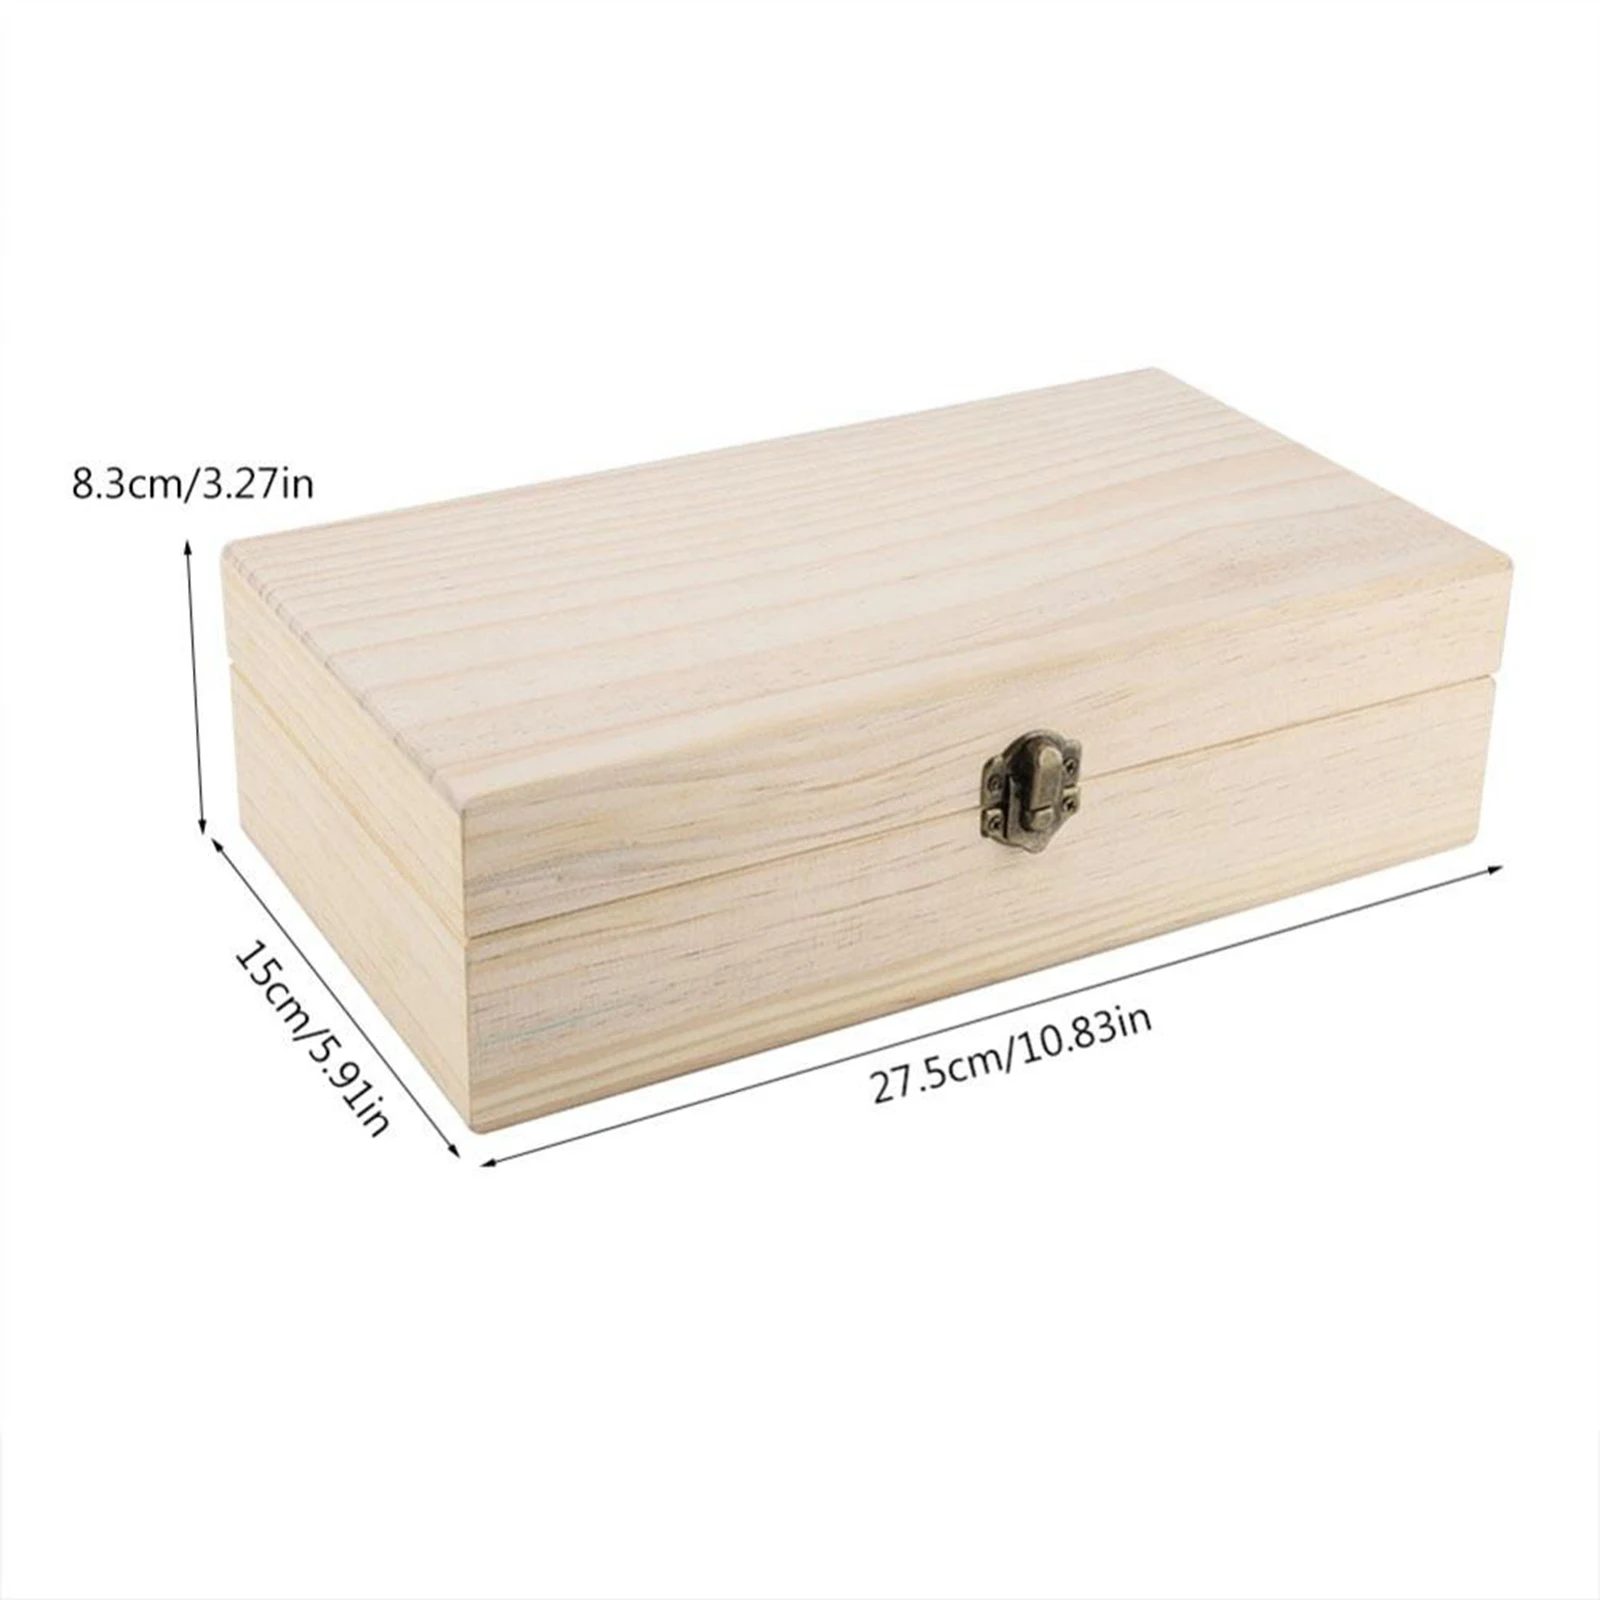 25 Slots Wooden Essential Oil Storage Box Aromatherapy Container Organizers